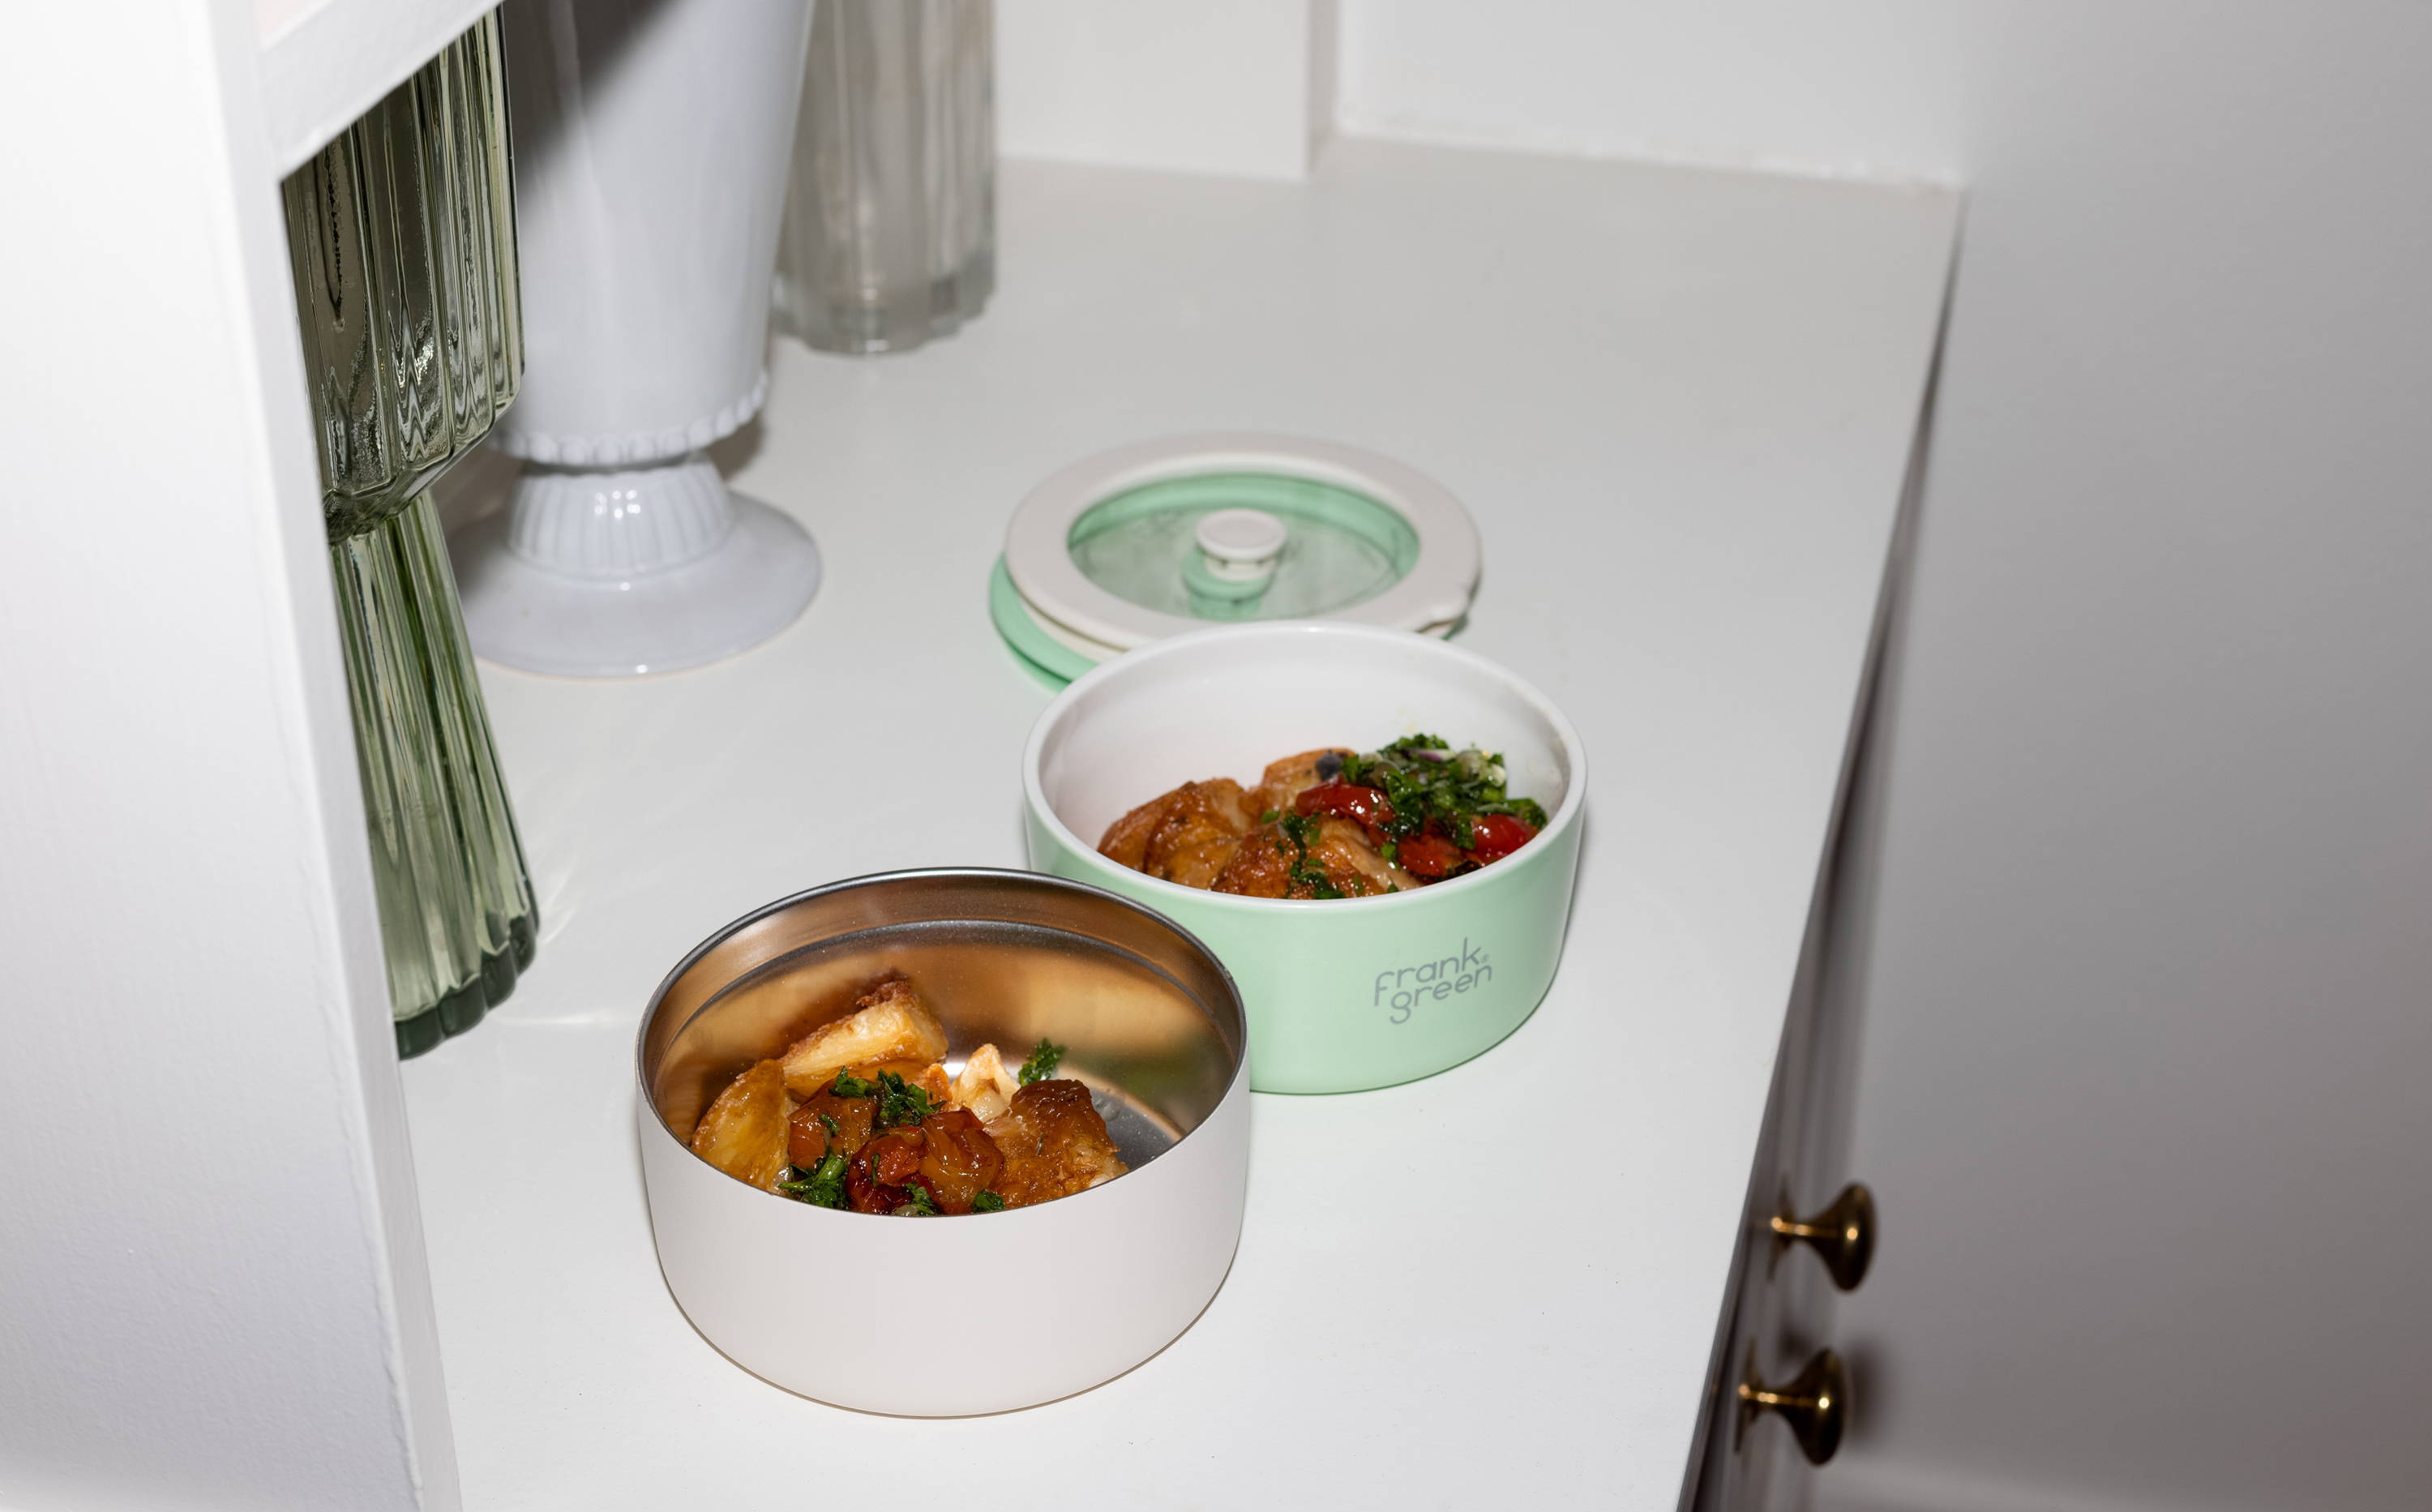 leftovers from club sup are placed in stainless steel and porcelain bowls for guests to take as leftovers